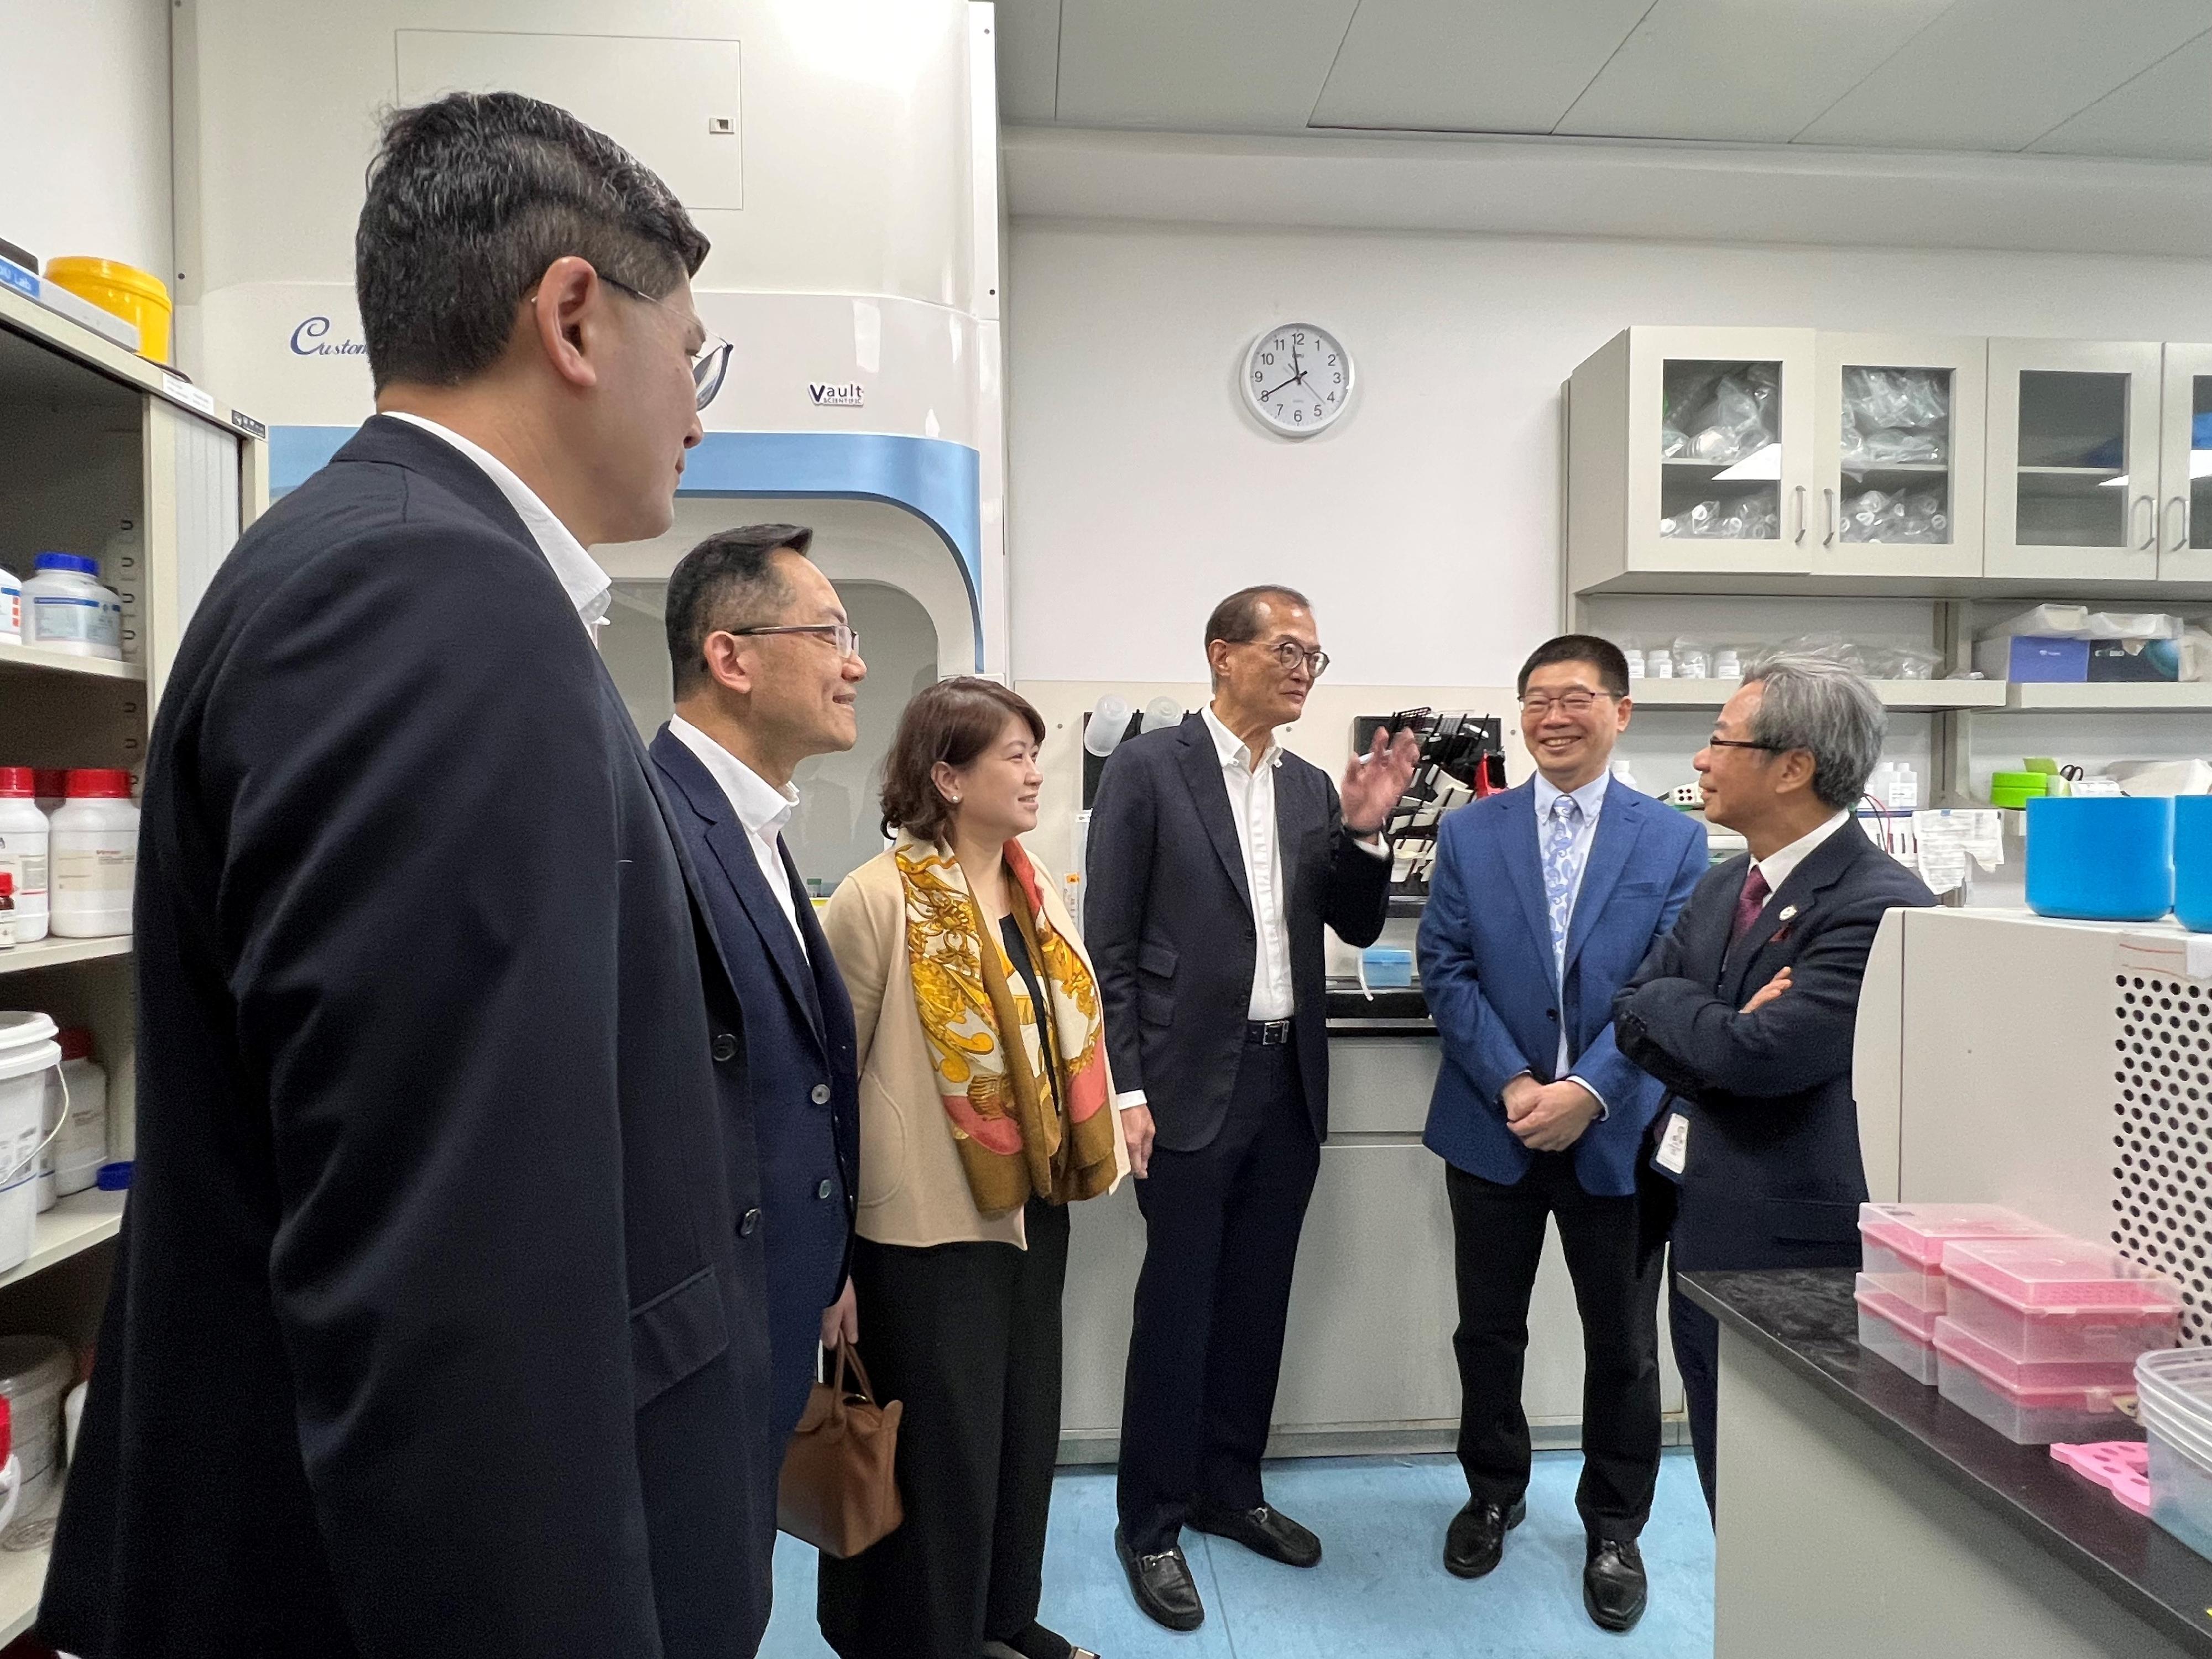 Accompanied by the Under Secretary for Health, Dr Libby Lee (third left); the Director of Health, Dr Ronald Lam (second left); and the Chief Executive of the Hospital Authority, Dr Tony Ko (first left), the Secretary for Health, Professor Lo Chung-mau (third right), visits a laboratory at the School of Medicine of the Chinese University of Hong Kong, Shenzhen, and chats with the Founding Dean of the School of Medicine, Professor Davy Cheng (first right), today (January 19).